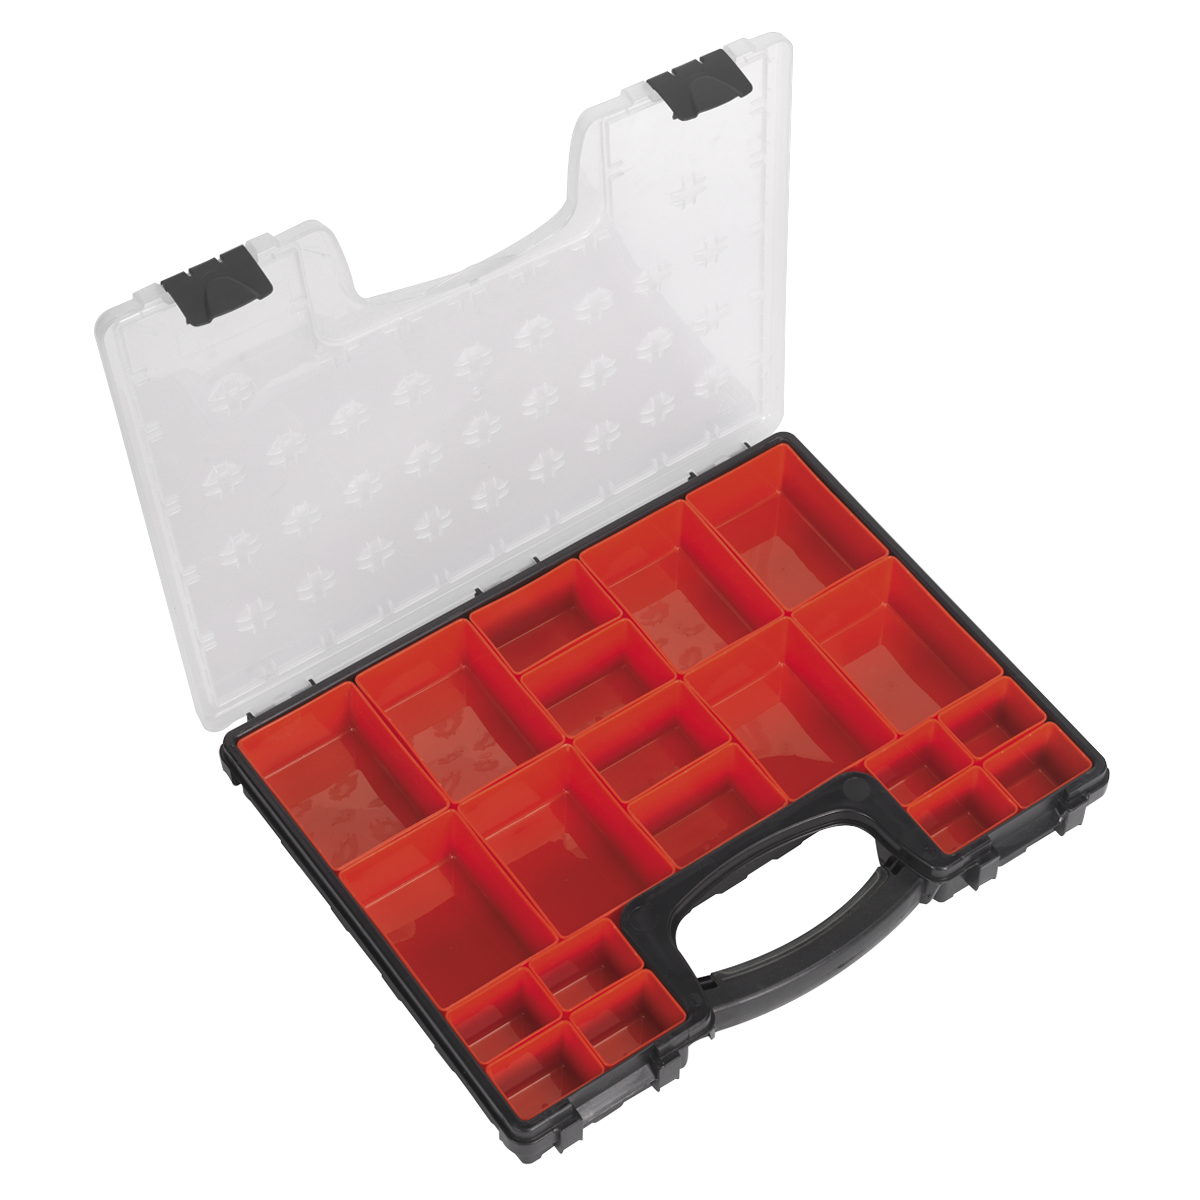 Ideal for storing a mixture of small parts and components.